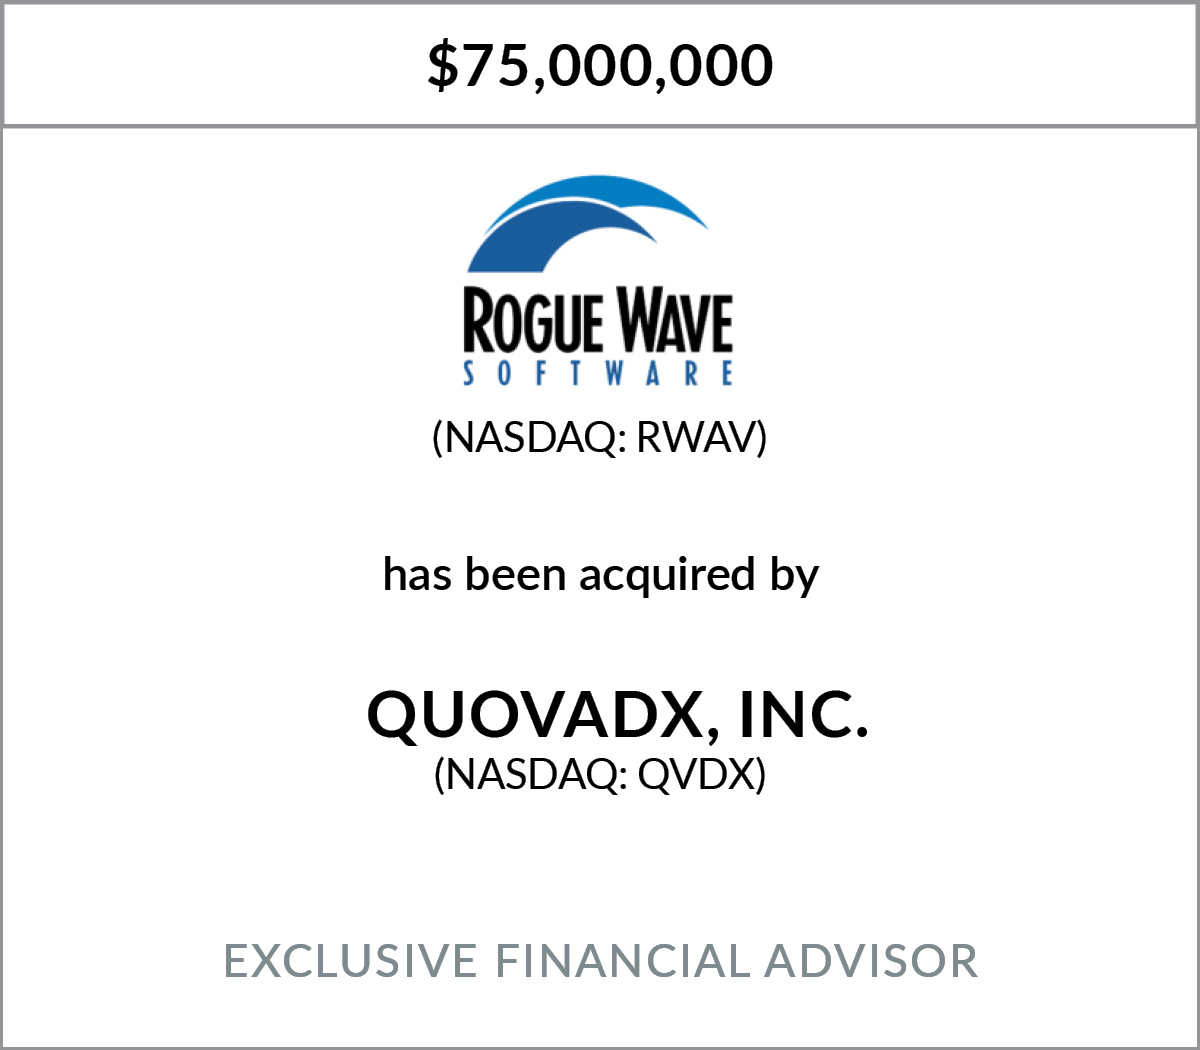 Rogue Wave Software, Inc. has been acquired by Quovadx, Inc.